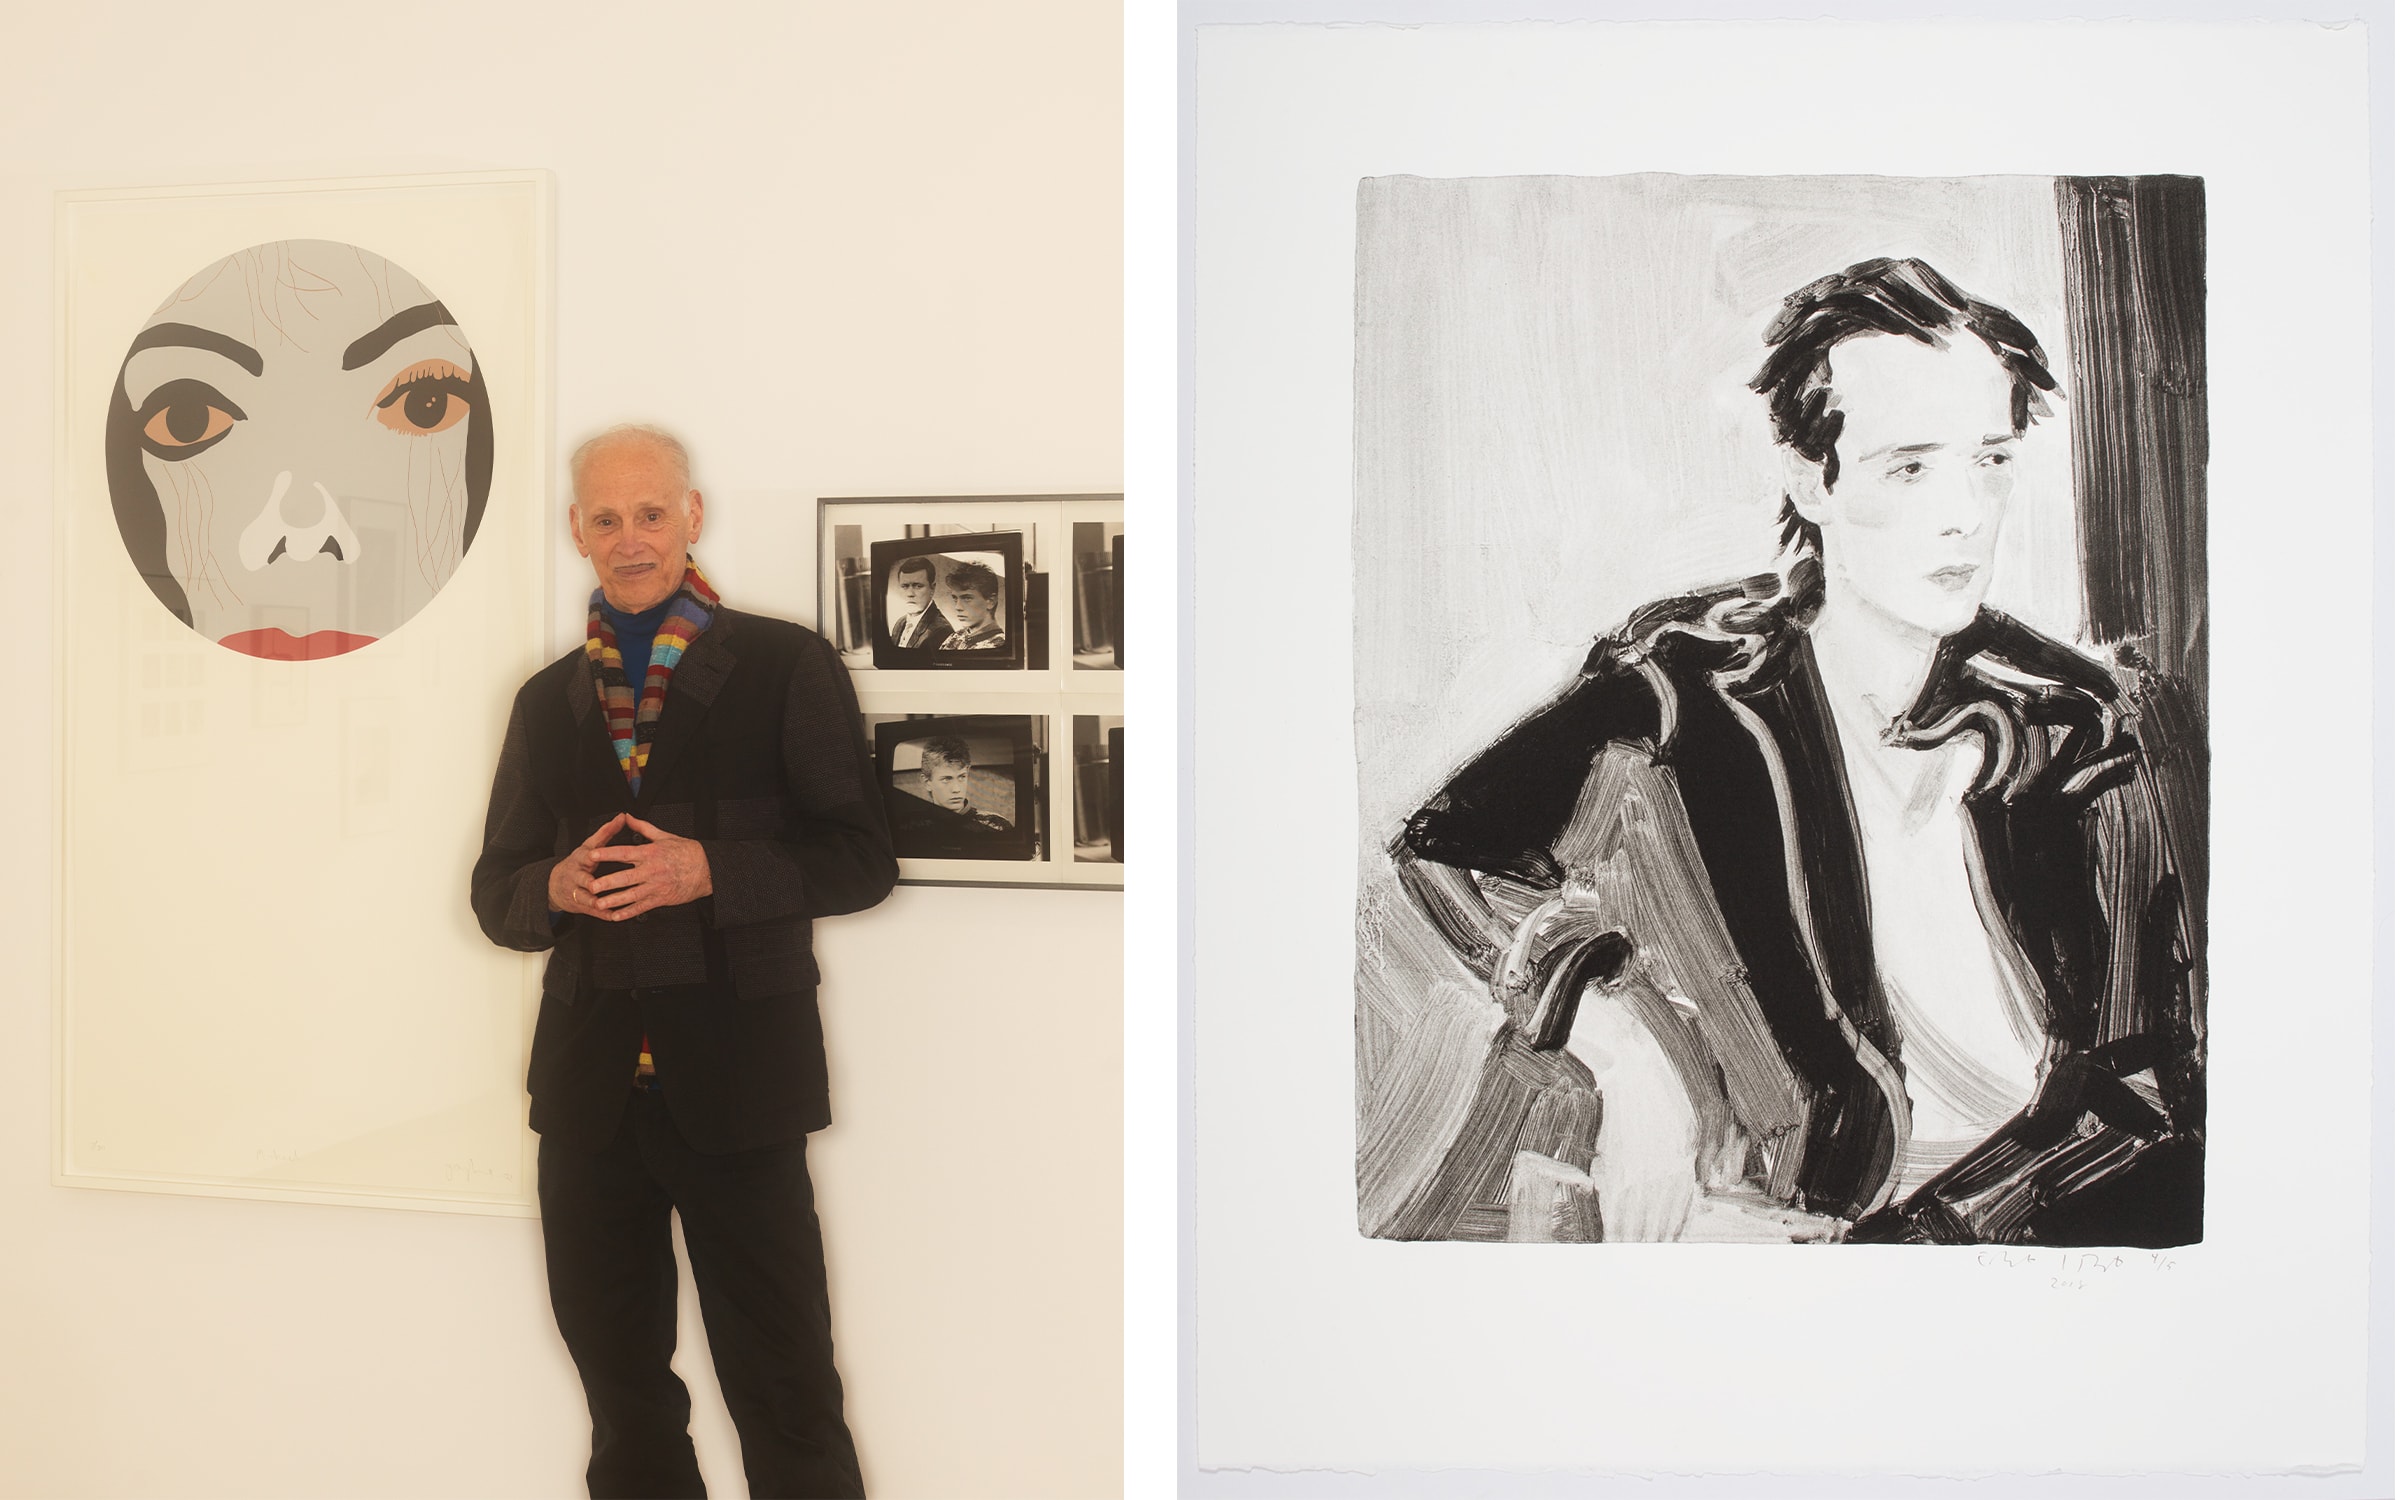 Left: Waters at the Baltimore Museum of Art, with Gary Hume's Michael (2022) and Larry Clark's Untitled (1990), both of which are part of the his collection. Right: Elizabeth Peyton, Colin (de Land), 2018. Collection of John Waters. © Elizabeth Peyton.